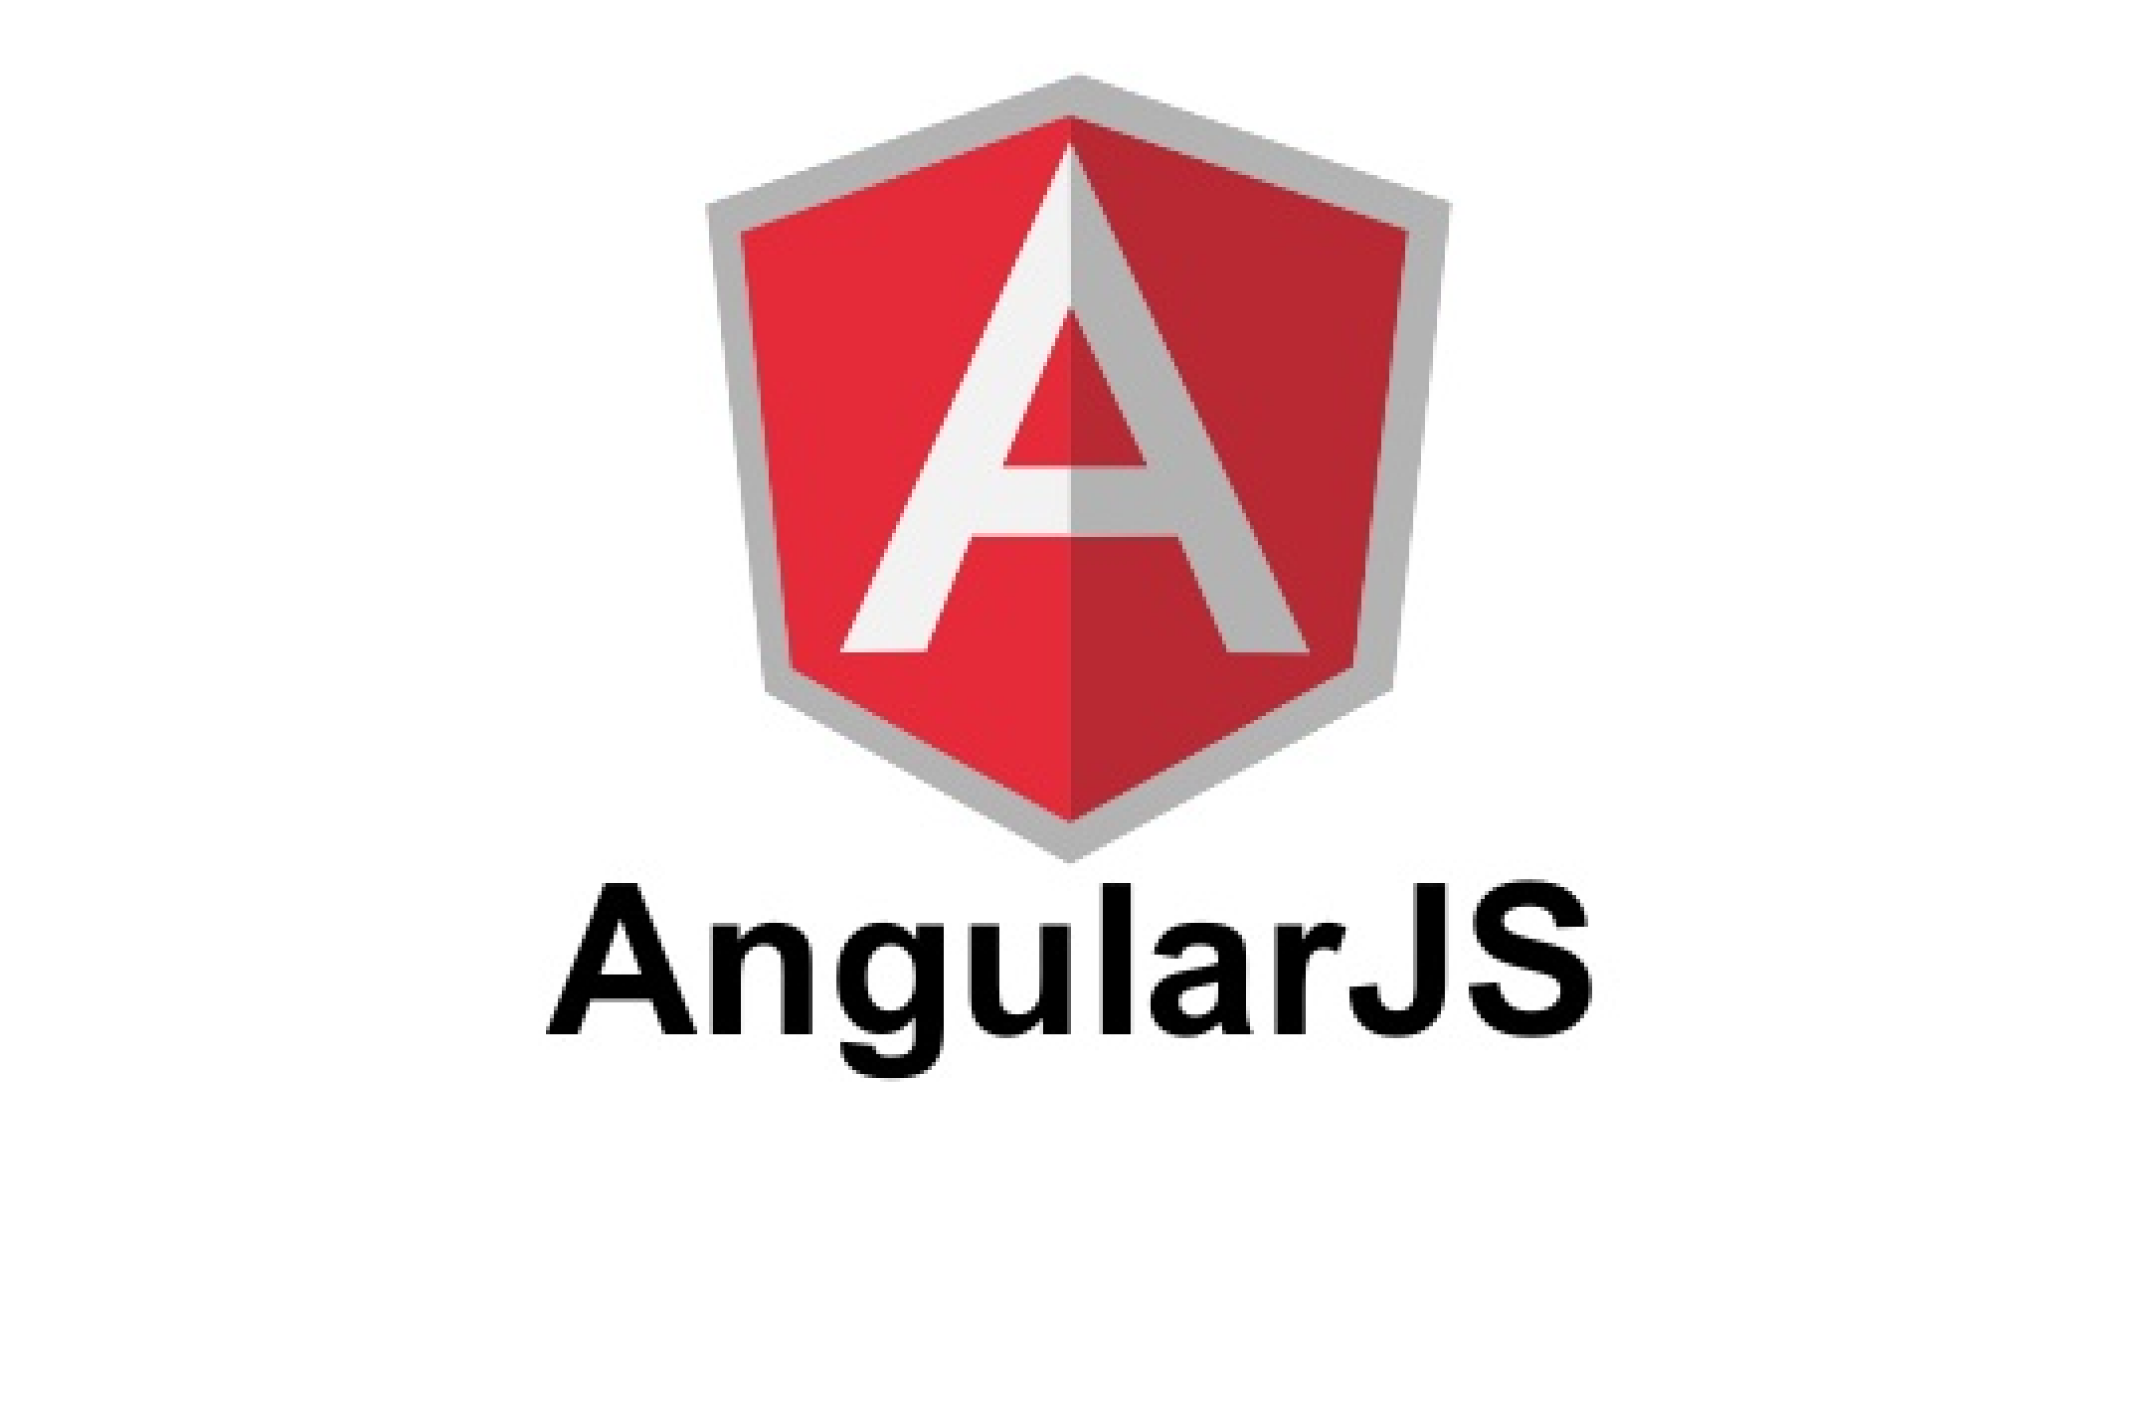 Developing App? Here’s Angular Practices & Tips